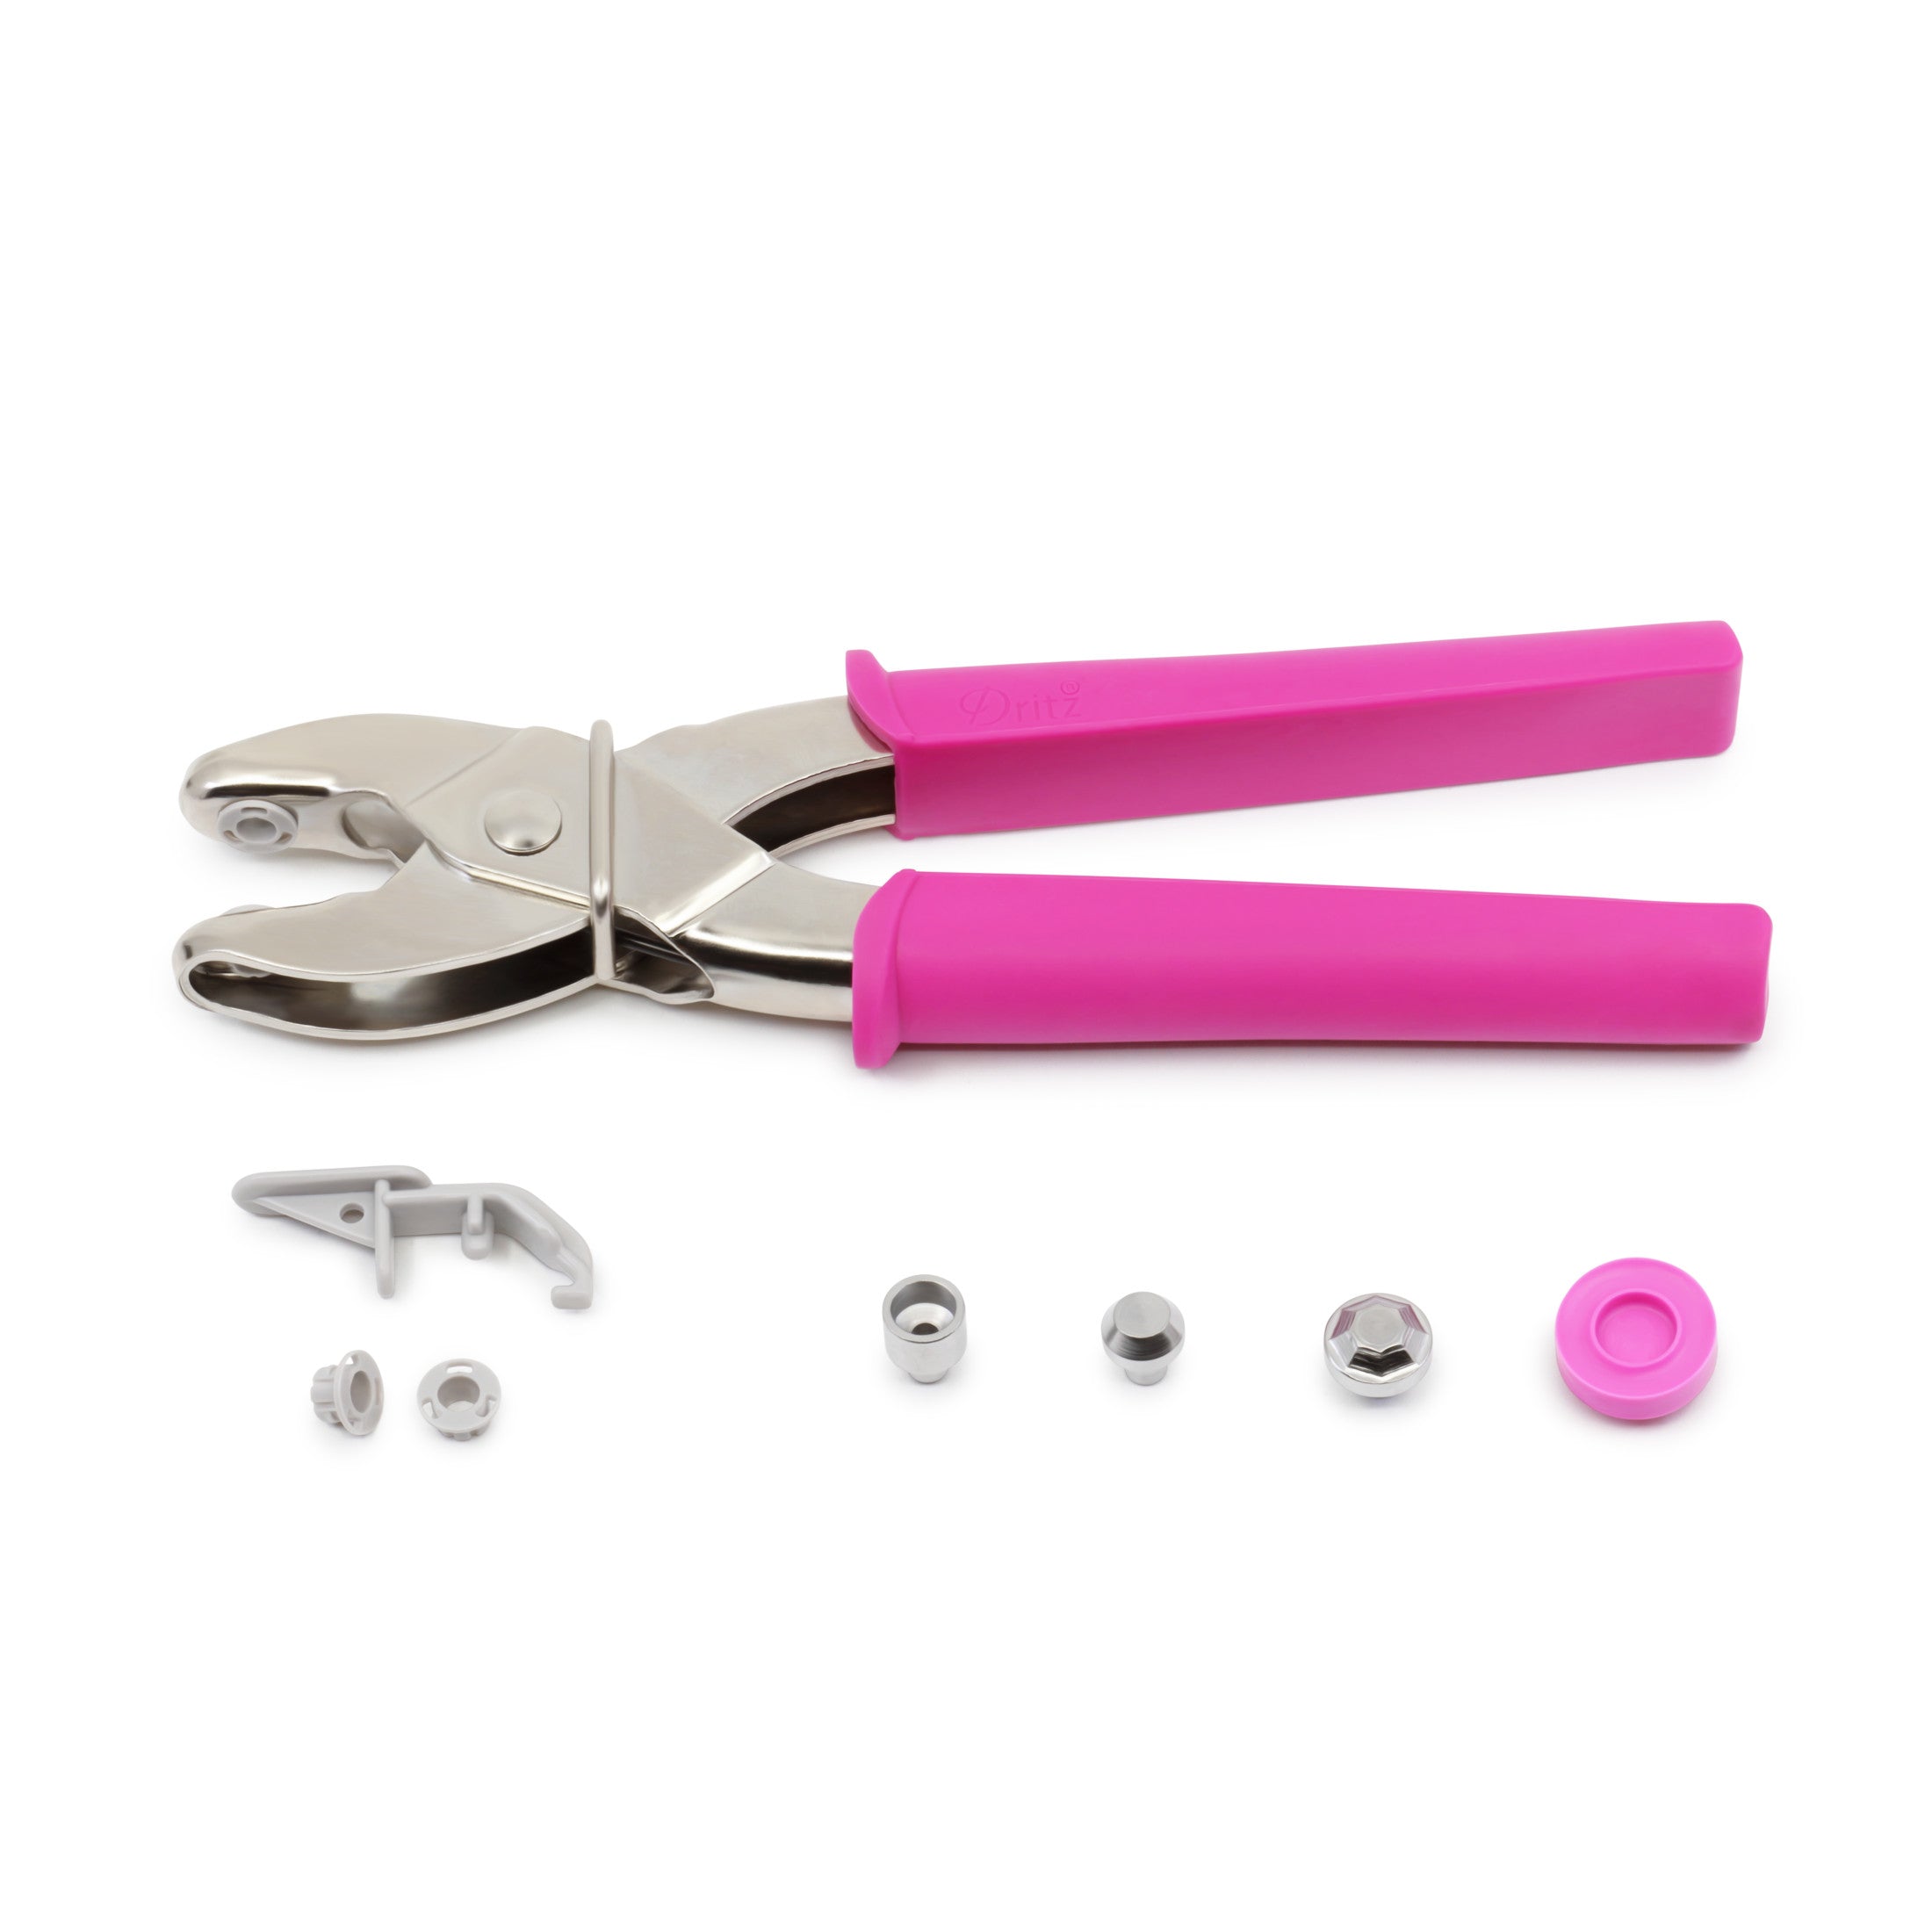 Pinking Shears or Pinking Blade? – Ready, Dress, Action!